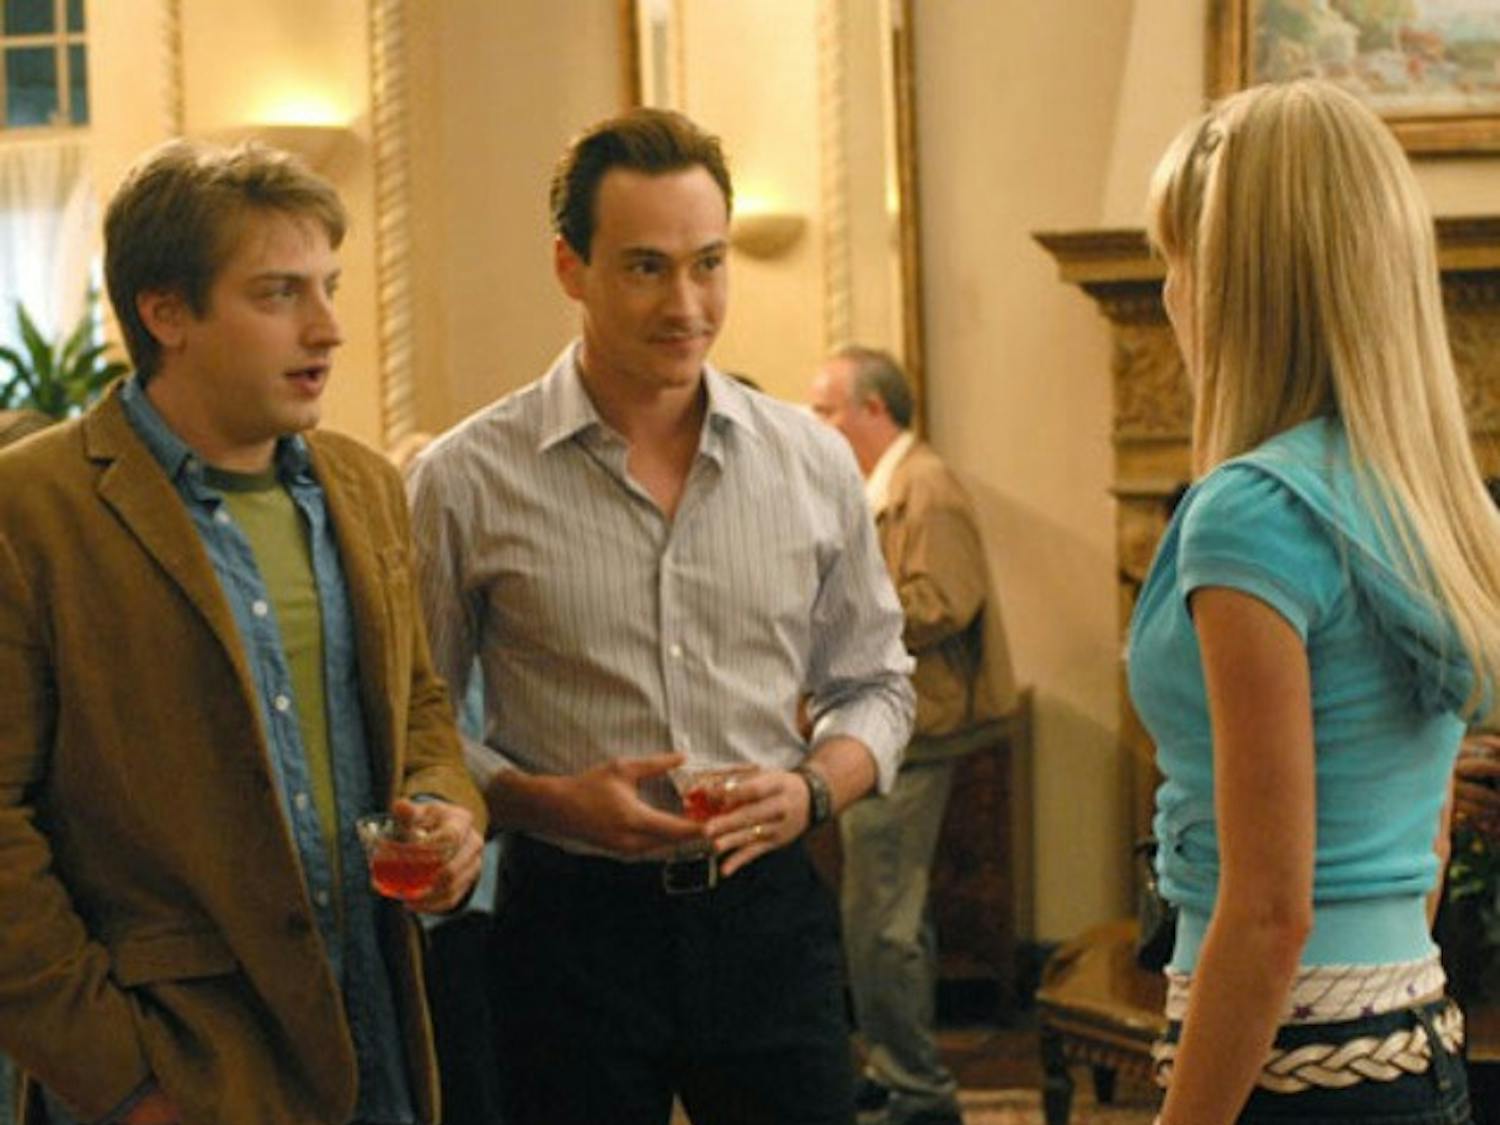 Frank Kranz and Chris Klein mingle in tonight's premiere of 